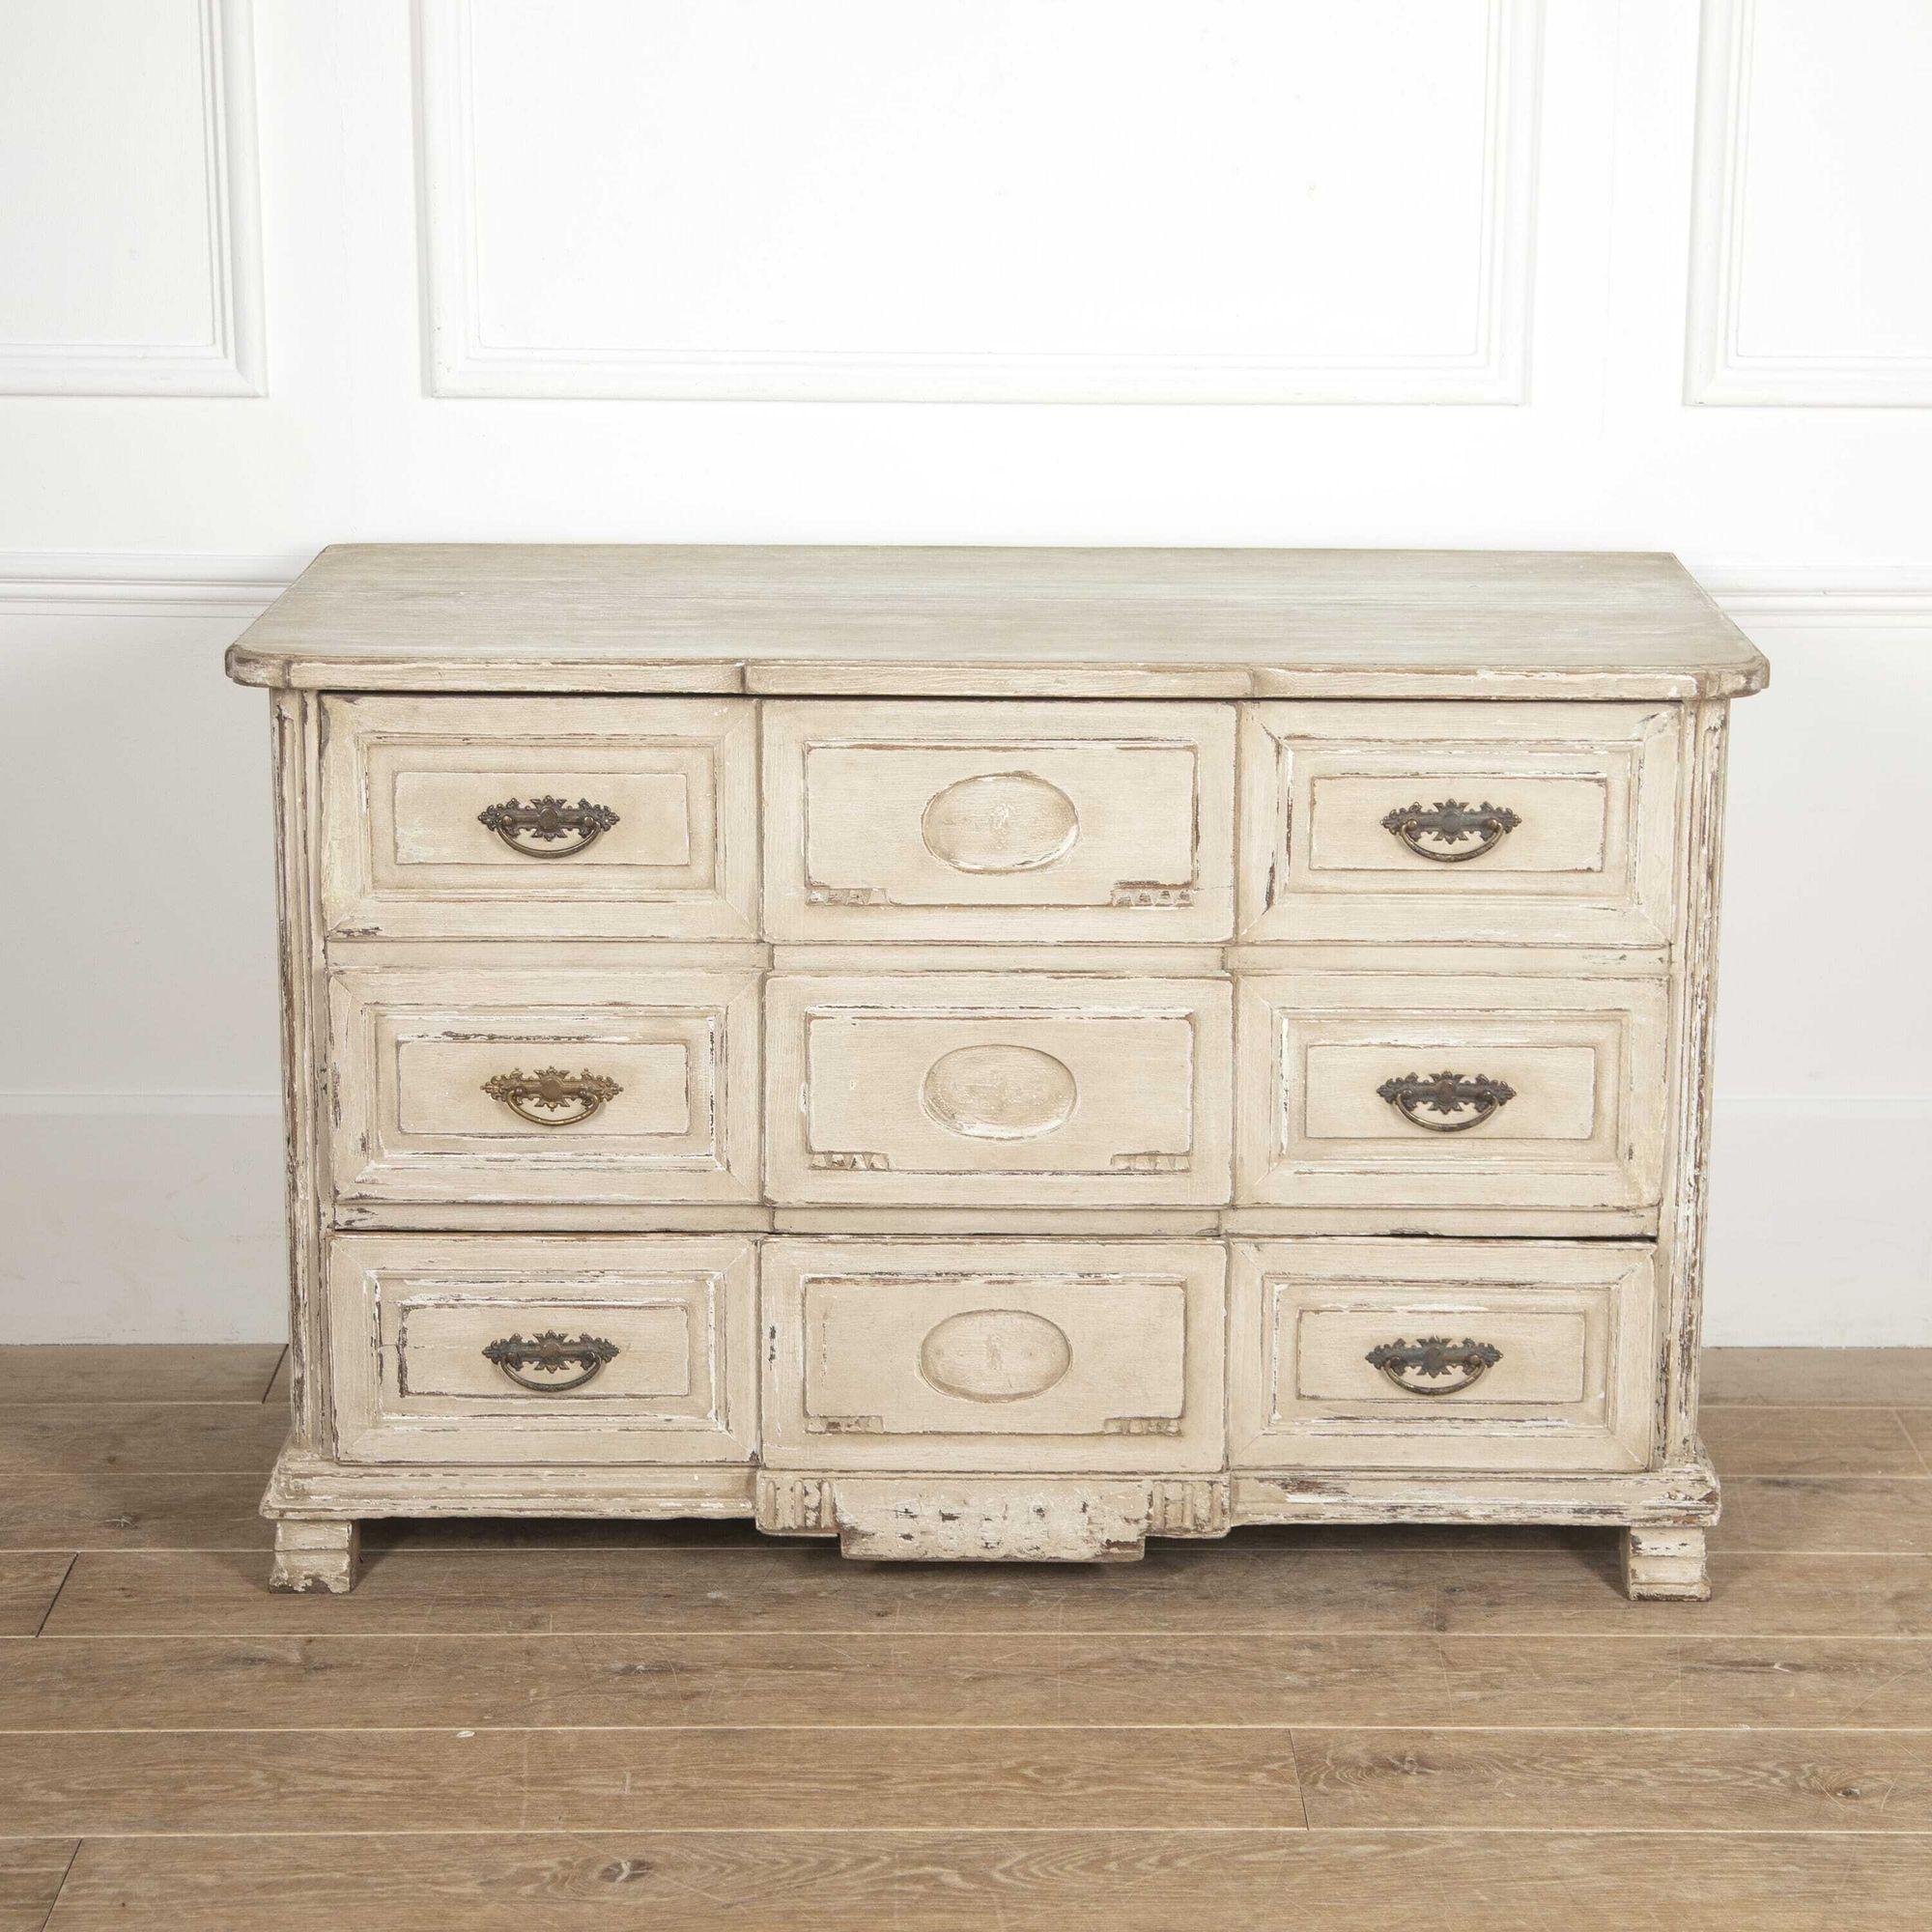 French 19th century painted breakfront commode.
This pretty chest features three long drawers with decorative metal handles to each end and unusual carved ovals to the central breakfront section. 
The sides are reeded and the piece is finished